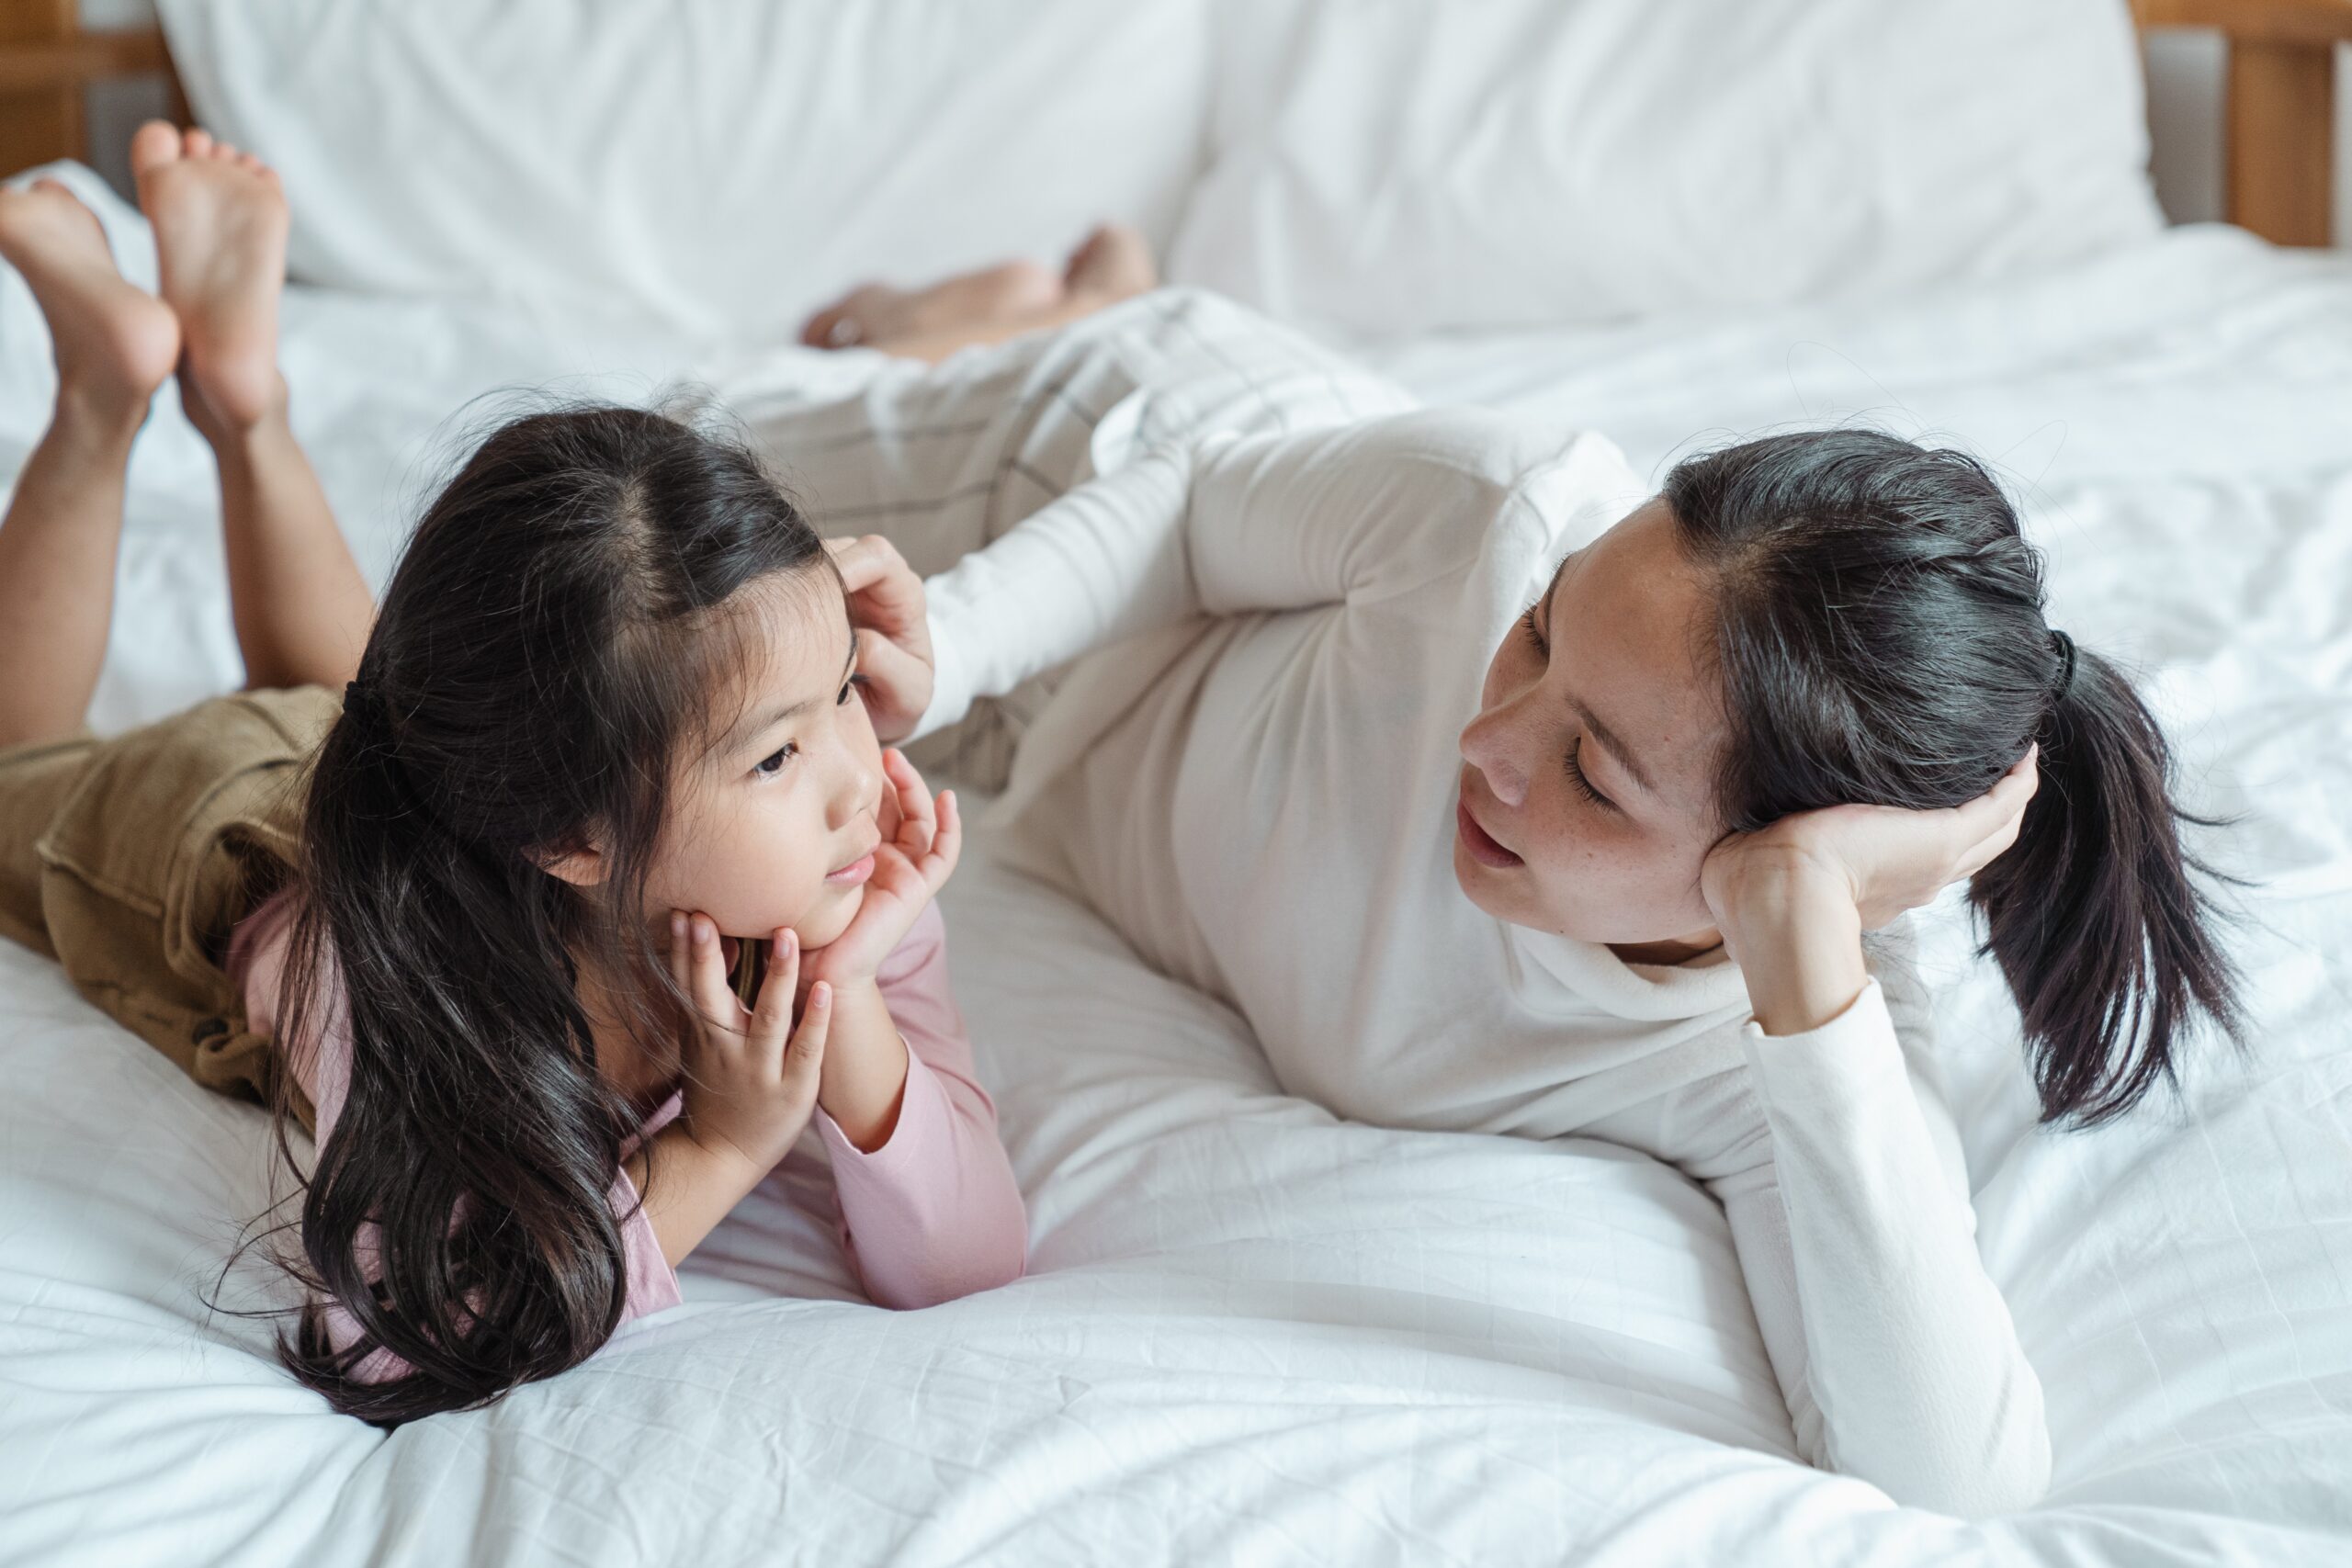 An Asian mother and daughter have a serious discussion on a bed.